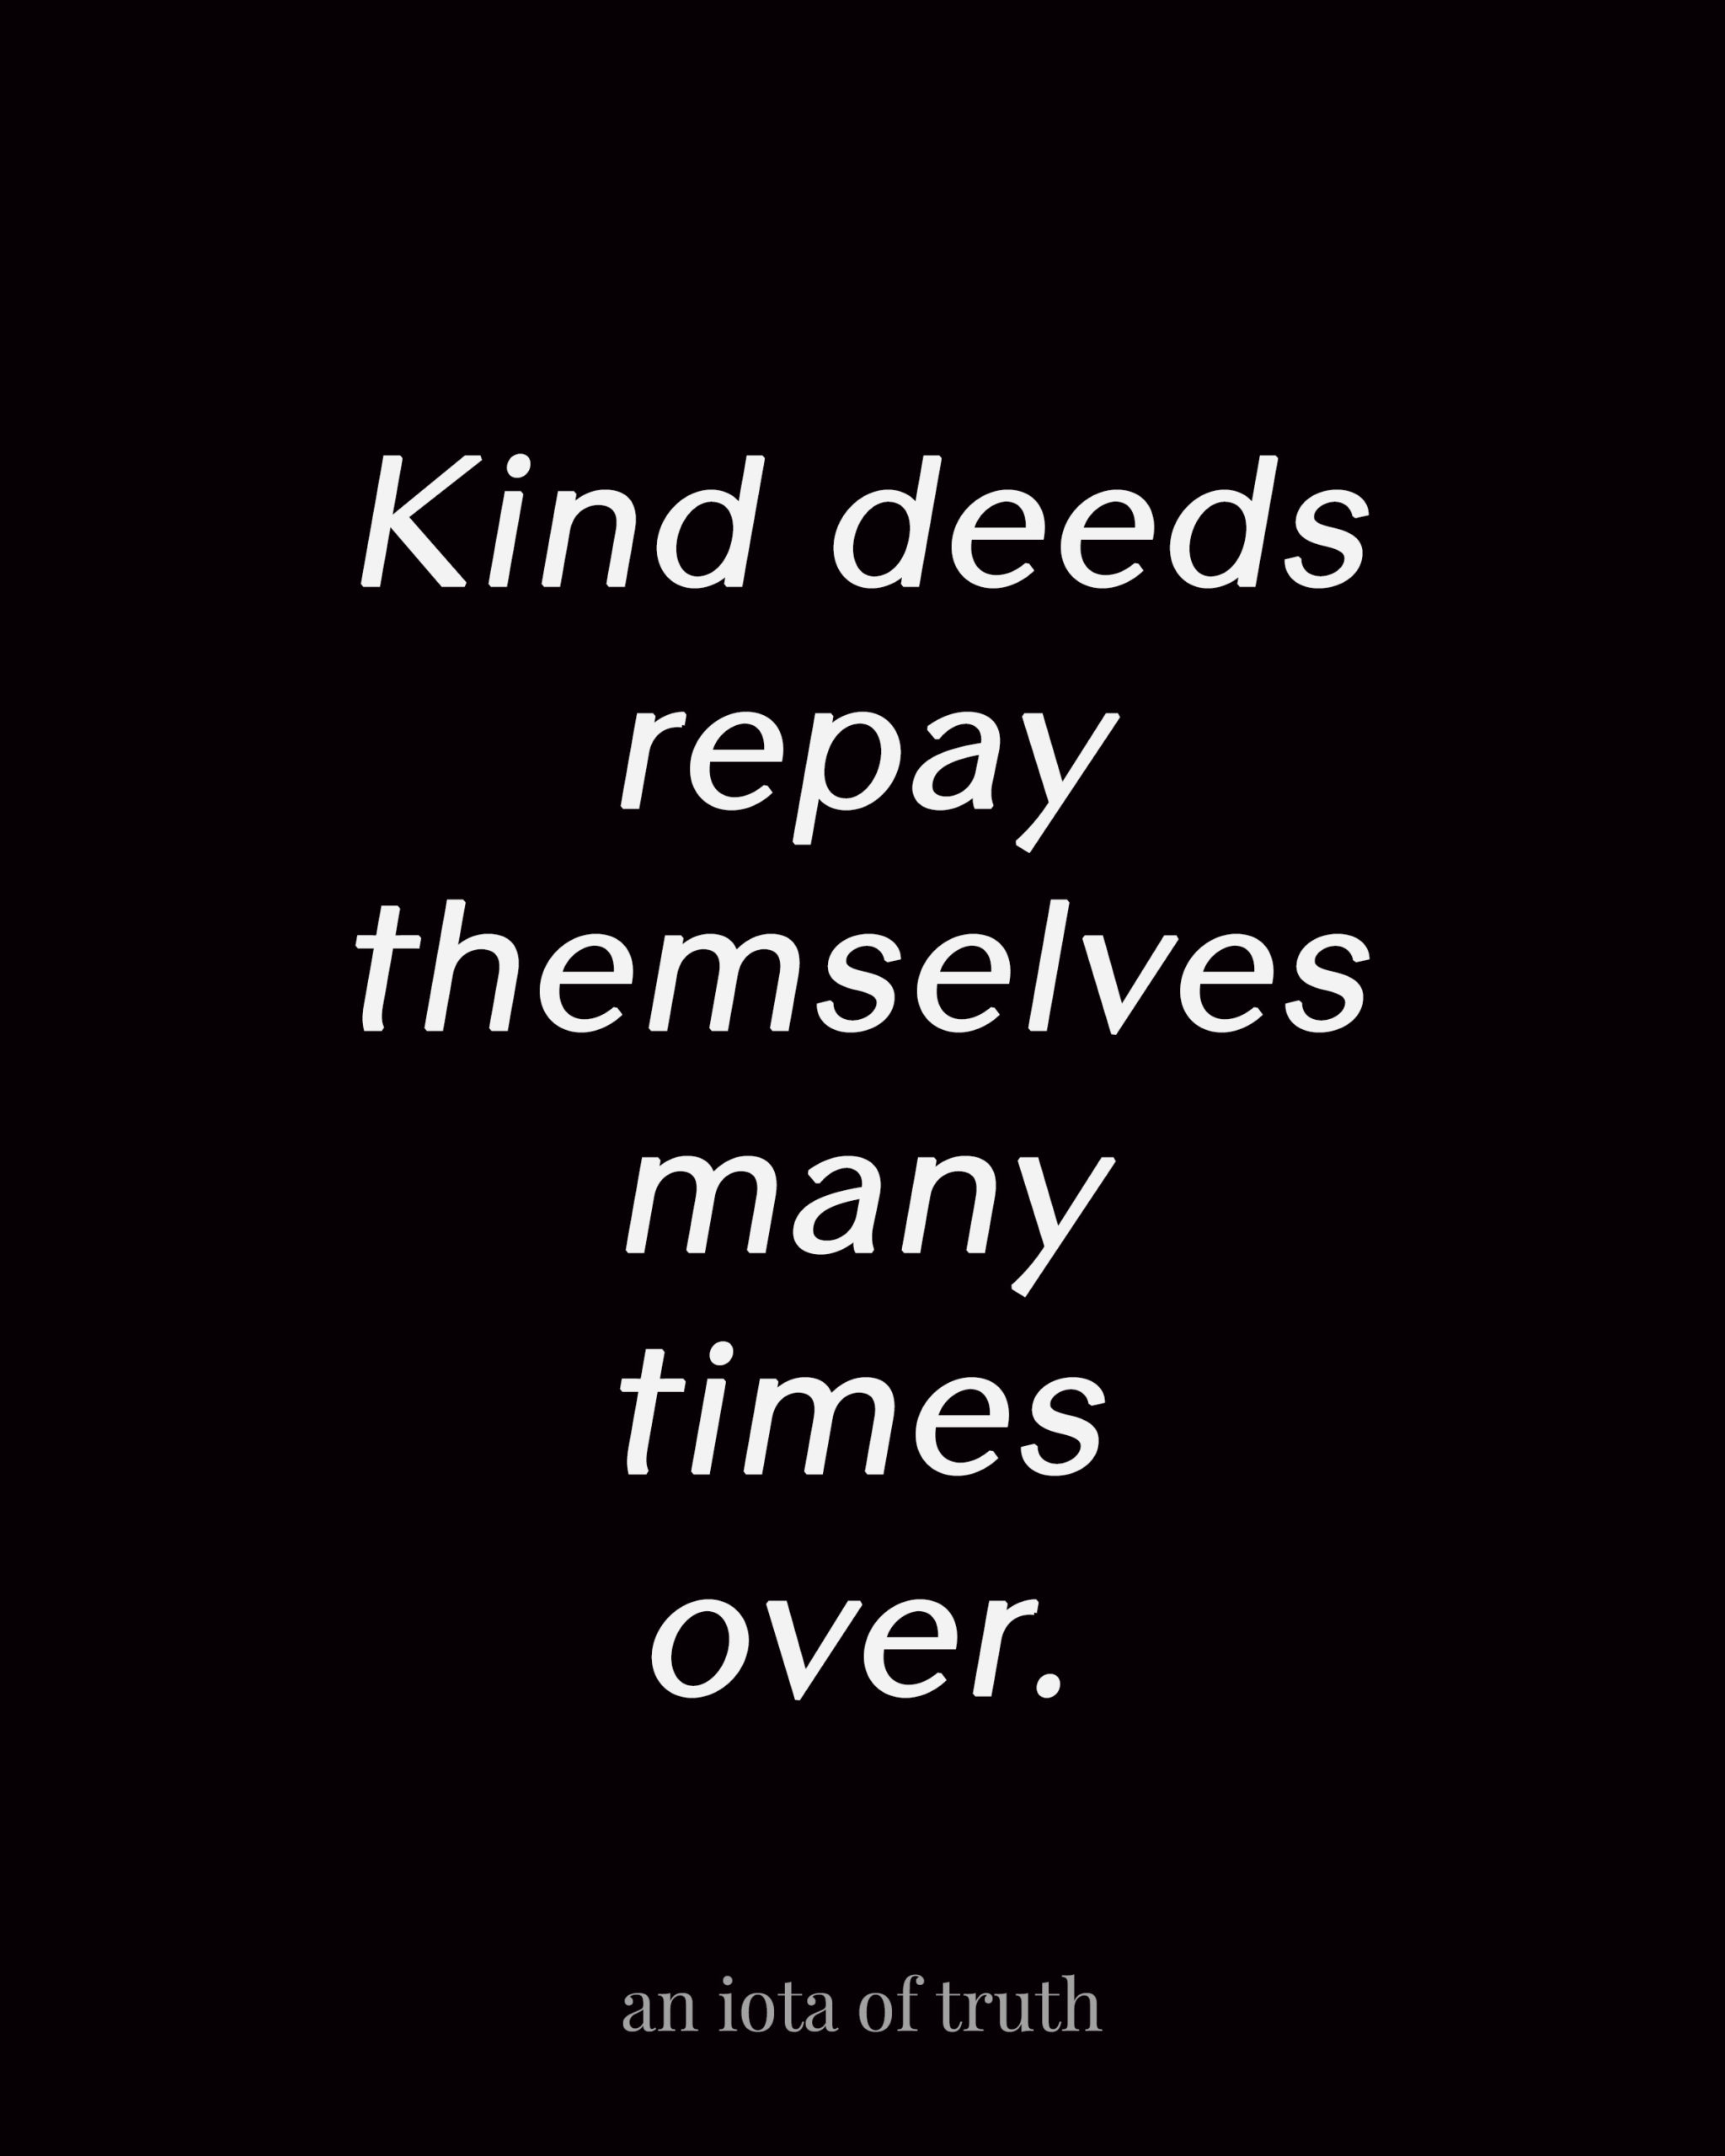 Kind deeds repay themselves many times over.